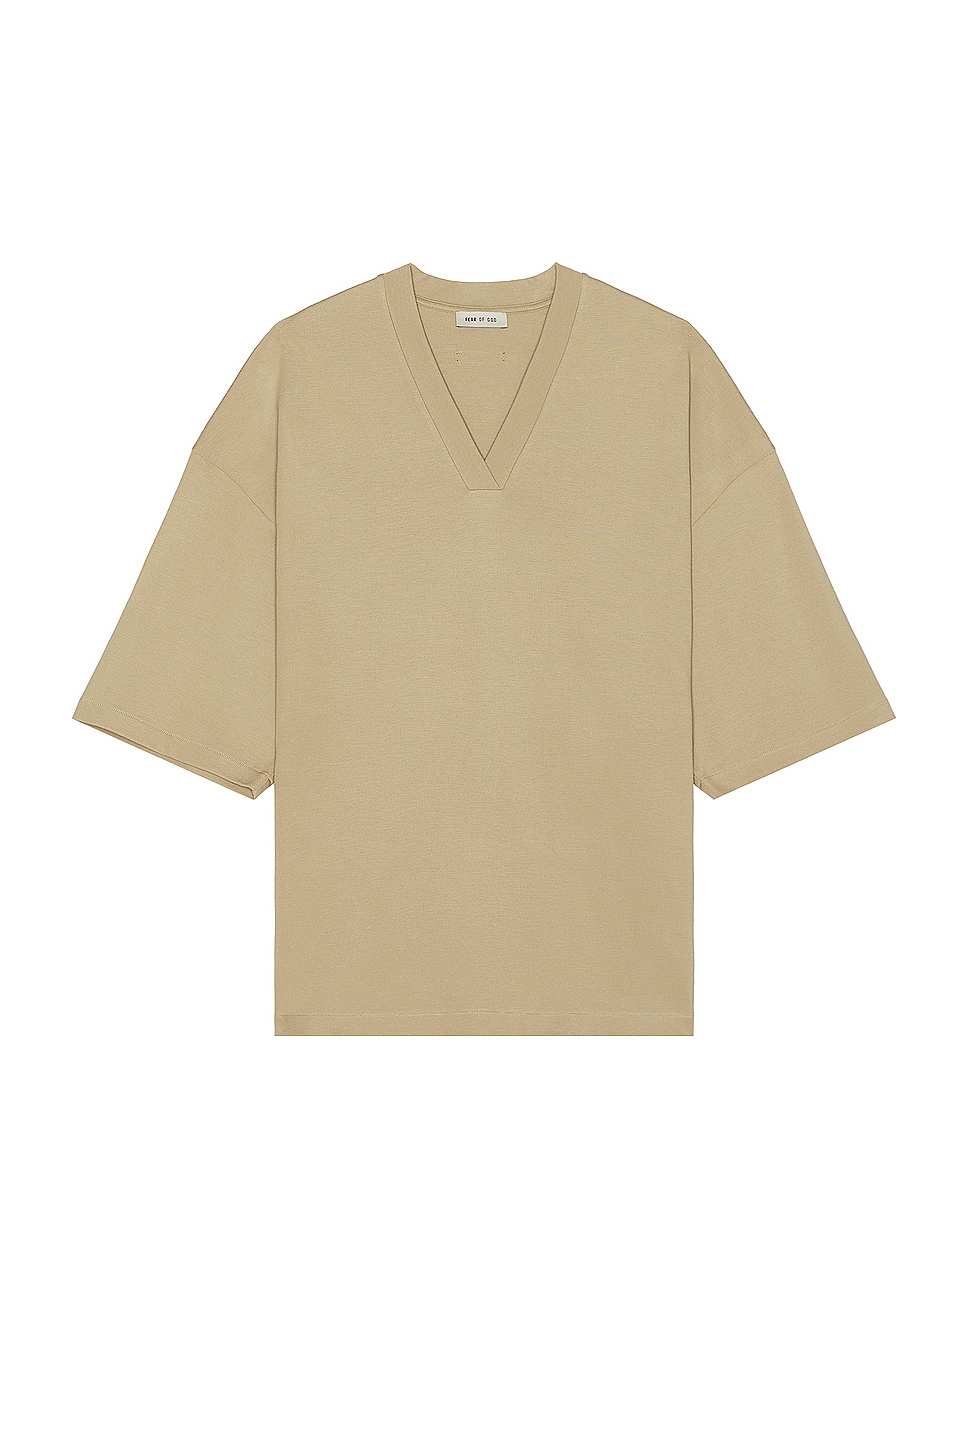 Image 1 of Fear of God Milano V Neck Tee in Dune